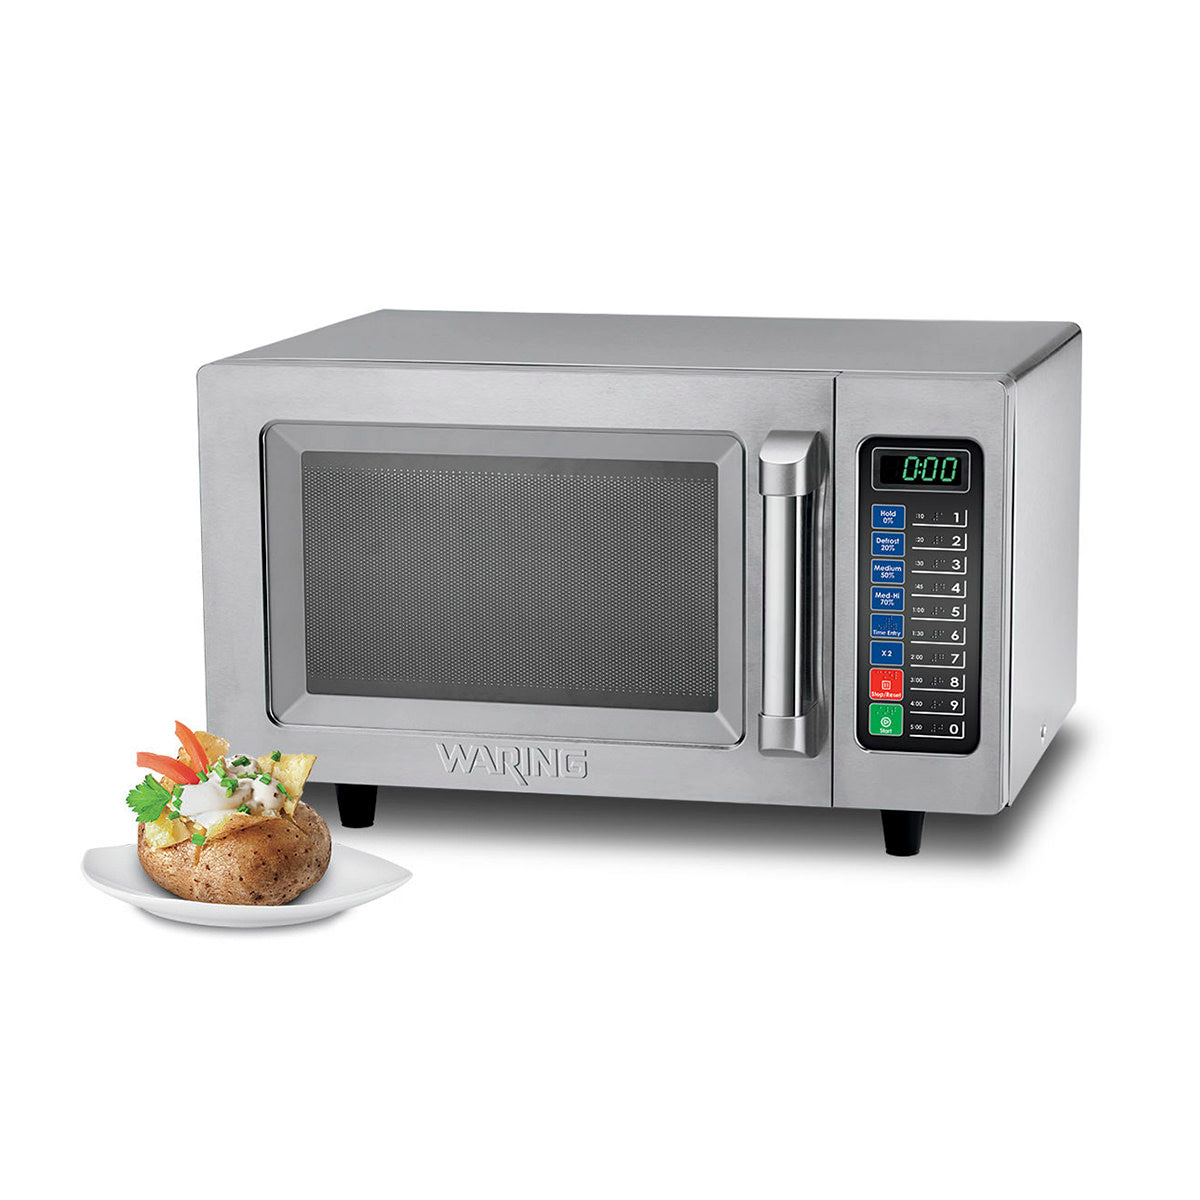 WMO90 Medium-Duty Microwave Oven by Waring Commercial